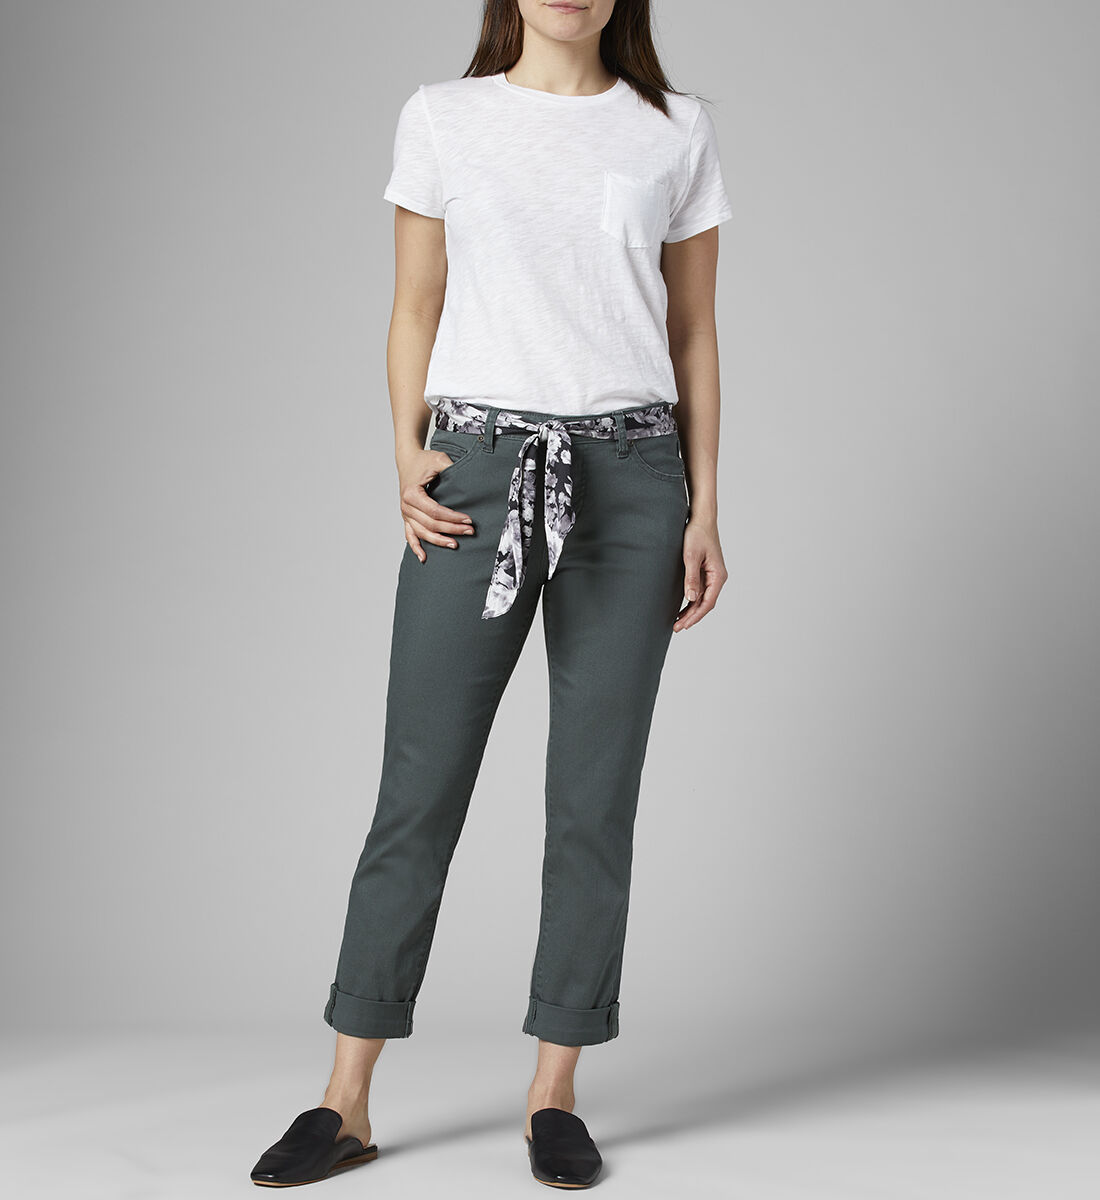 Buy Carter with Satin Belt for USD 26.00 | Jag Jeans US New